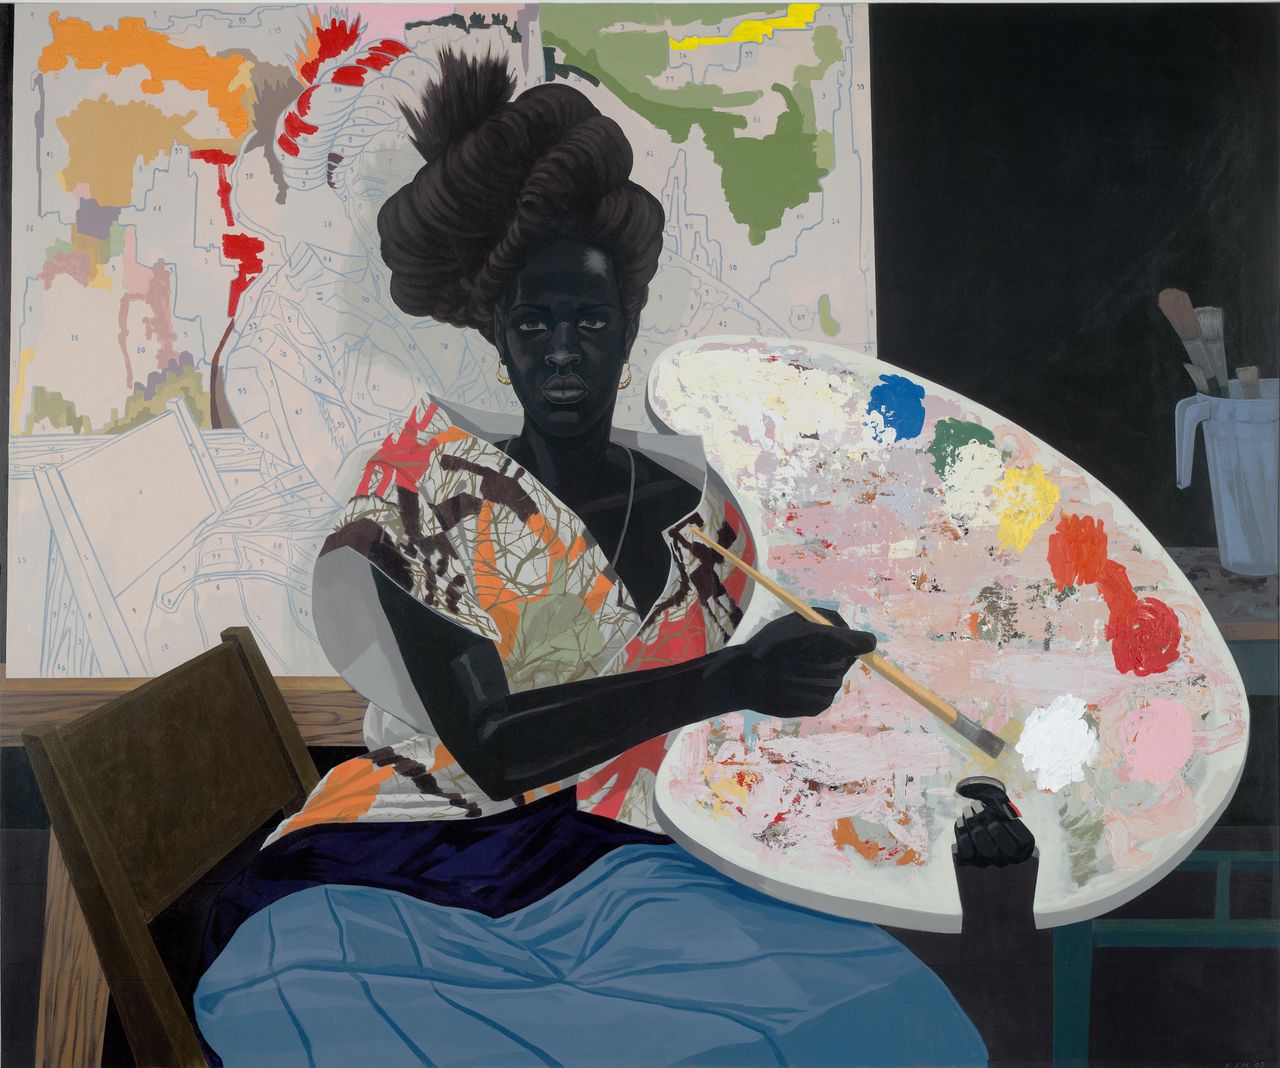 Kerry James Marshall, "Untitled," 2009, Acrylic on PVC panel. Yale University Art Gallery, Purchased with the Janet and Simeon Braguin Fund and a gift from Jacqueline L. Bradley, B.A. 1979.